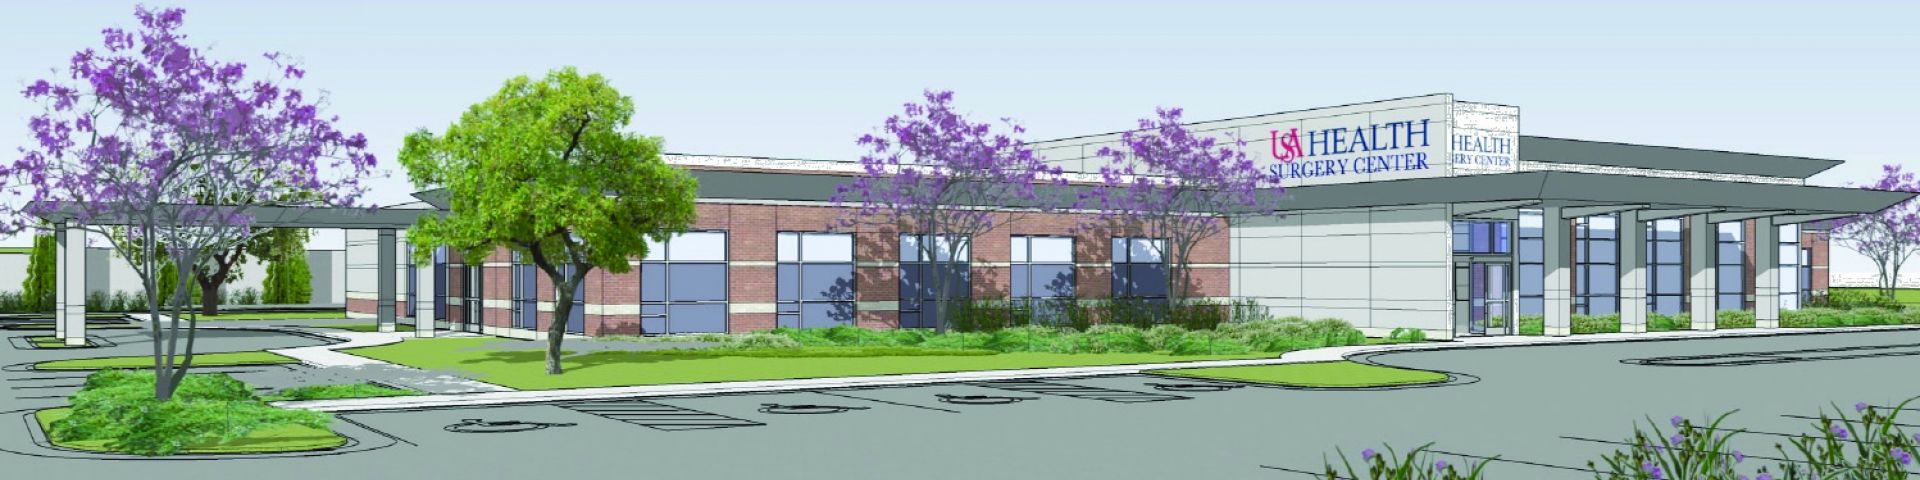 USA Health gains approval to build free-standing surgery center in west Mobile